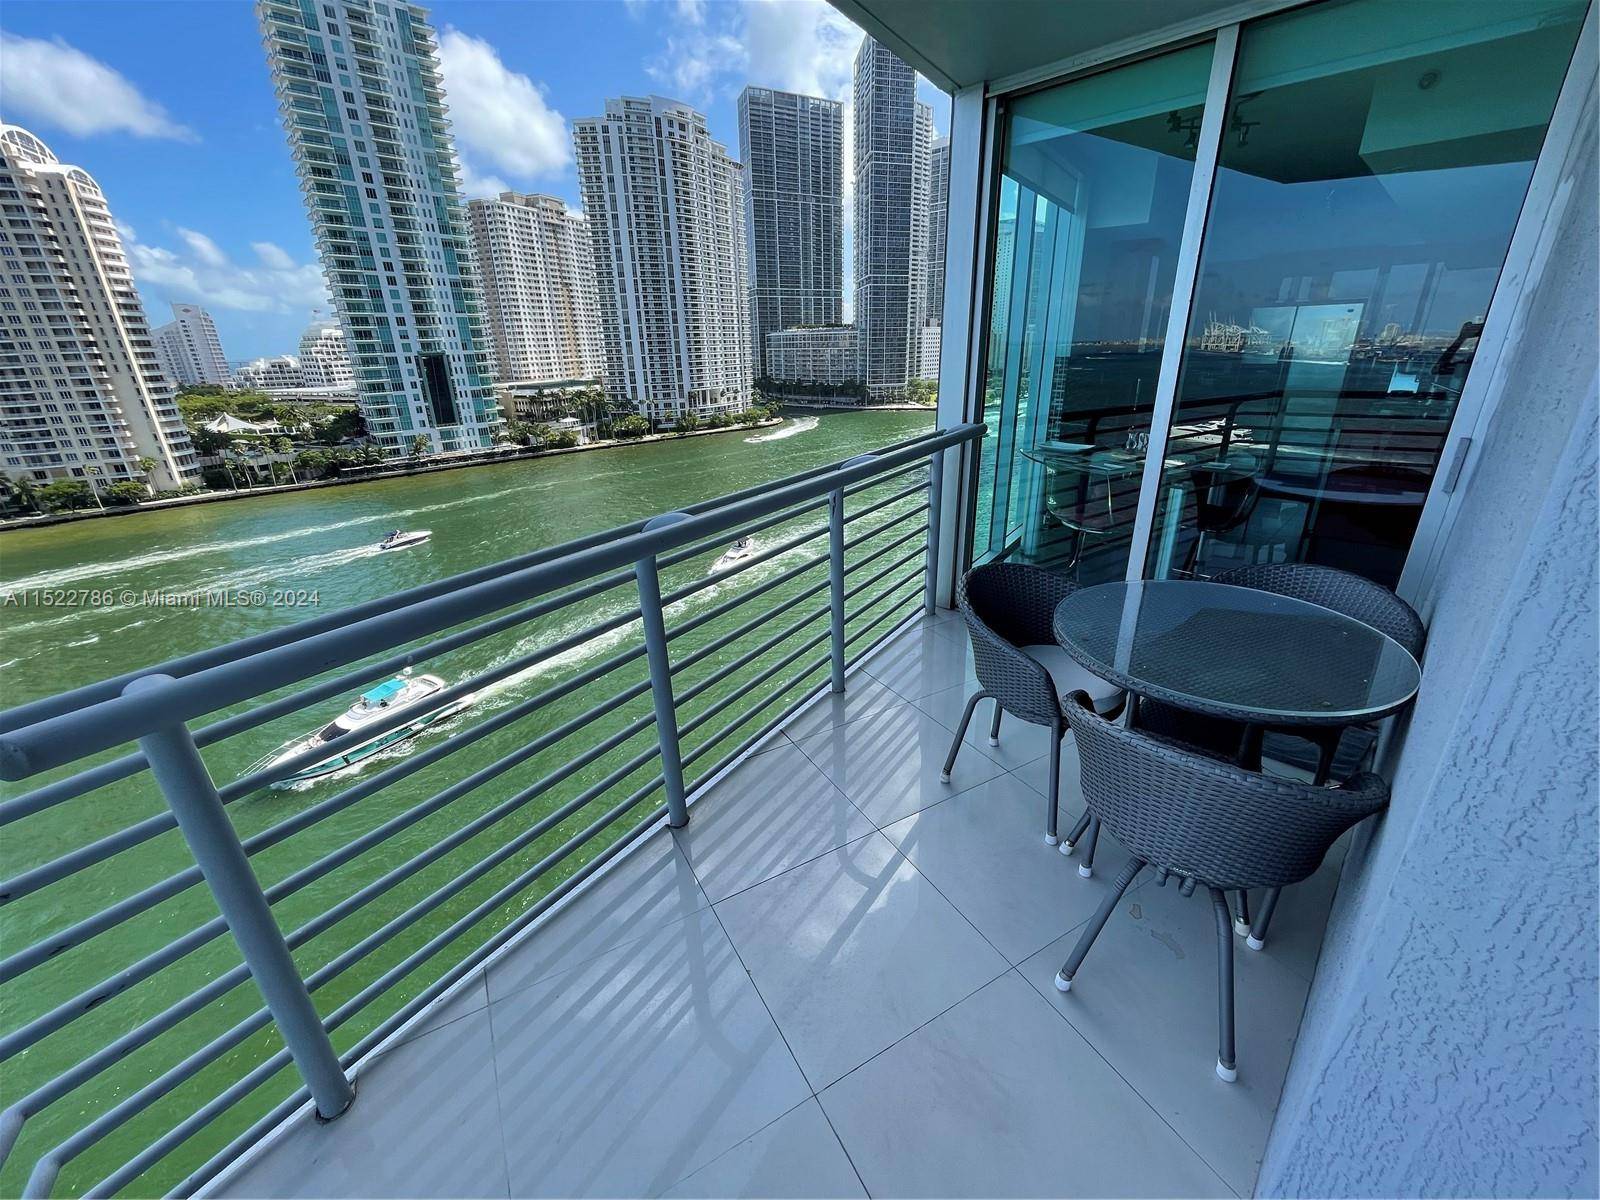 CORNER UNIT WITH UNOBTRUCTED WATER VIEWS, RARELY AVAILABLE AT ONE MIAMI 09 LINE.